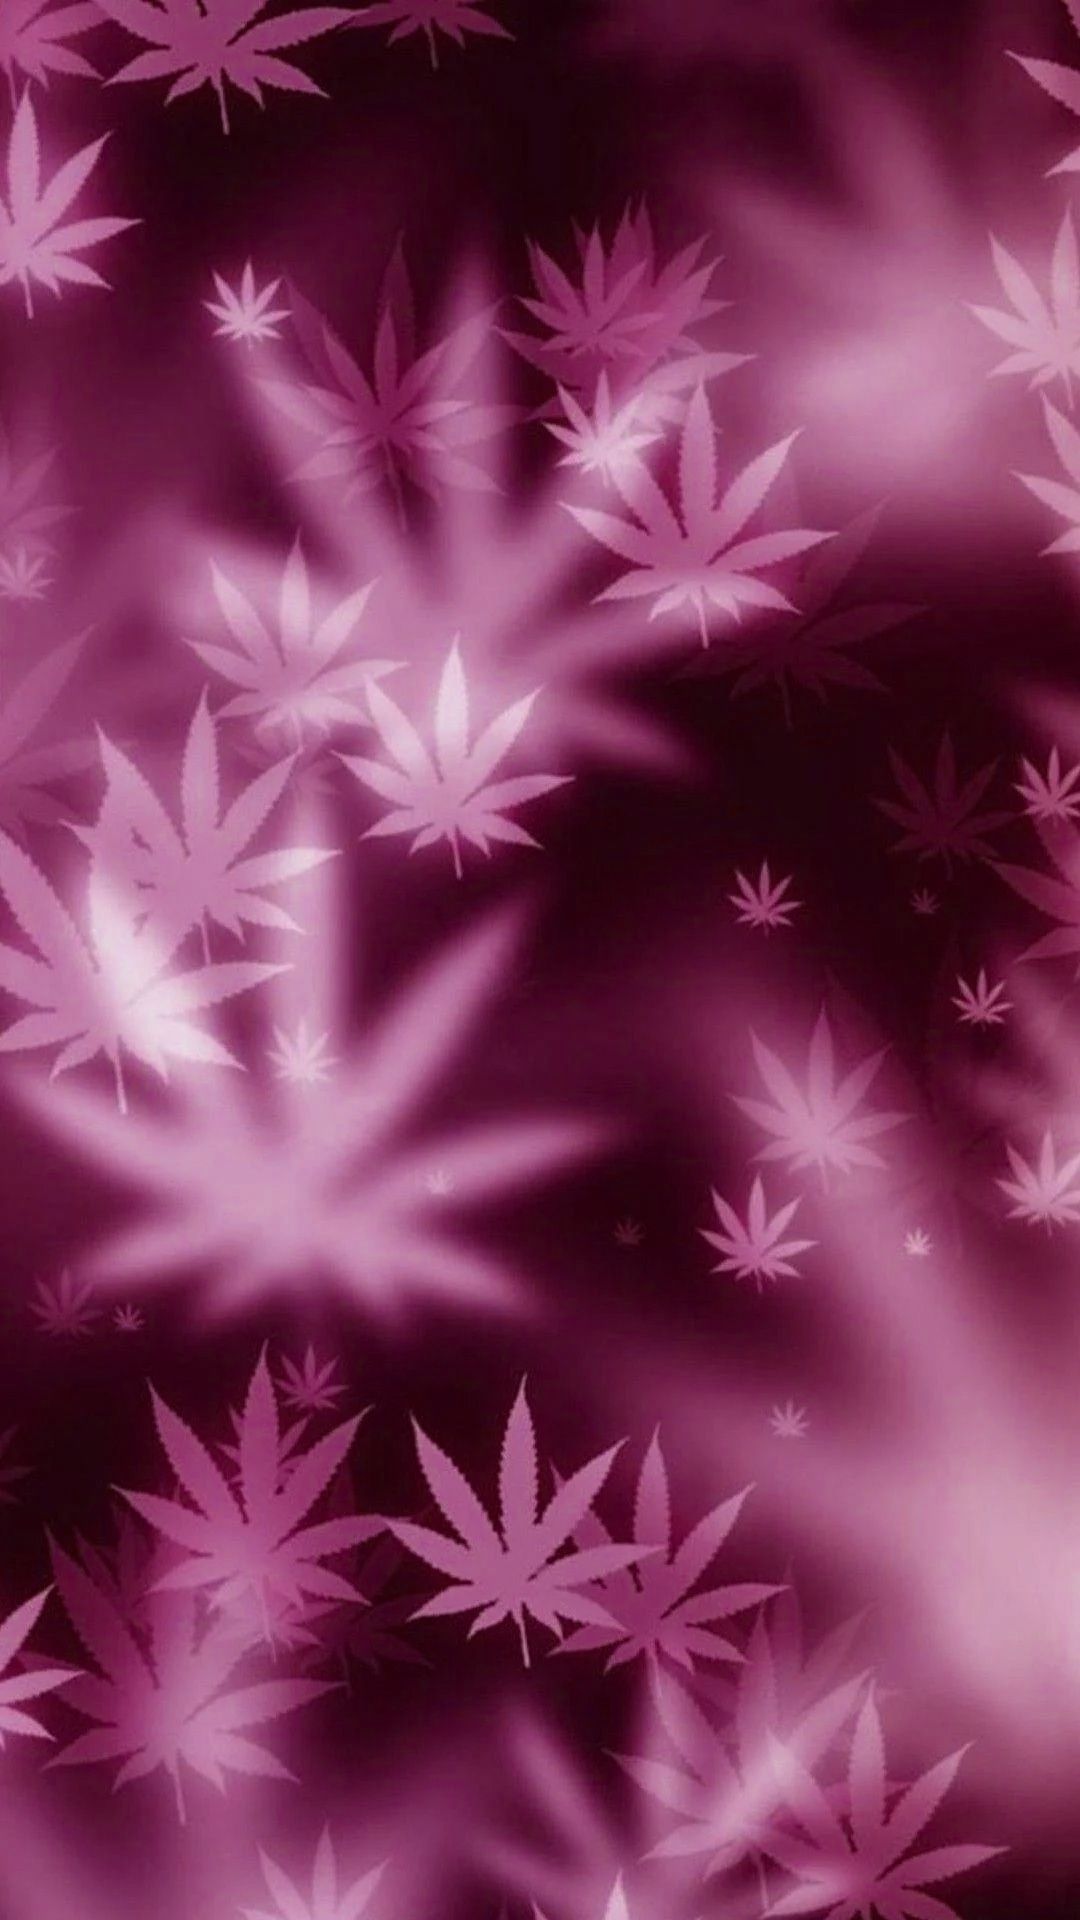 A purple background with leaves on it - Weed